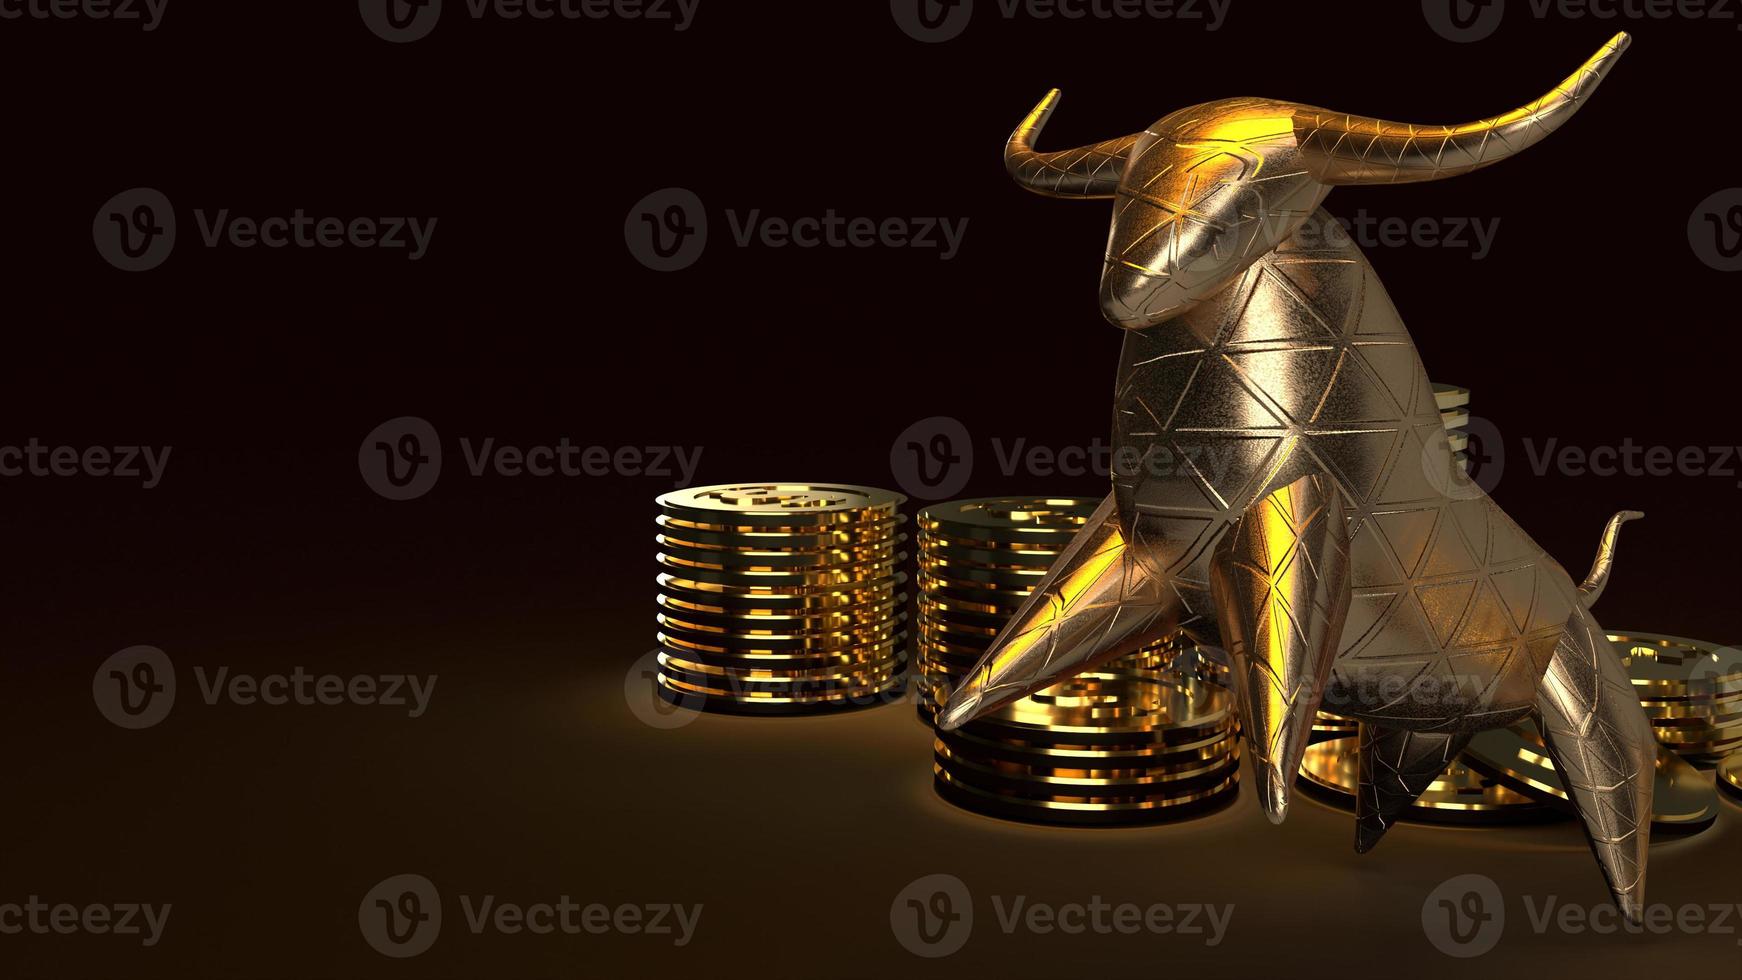 bull gold and gold coins 3d rendering in dark tone for business content. photo